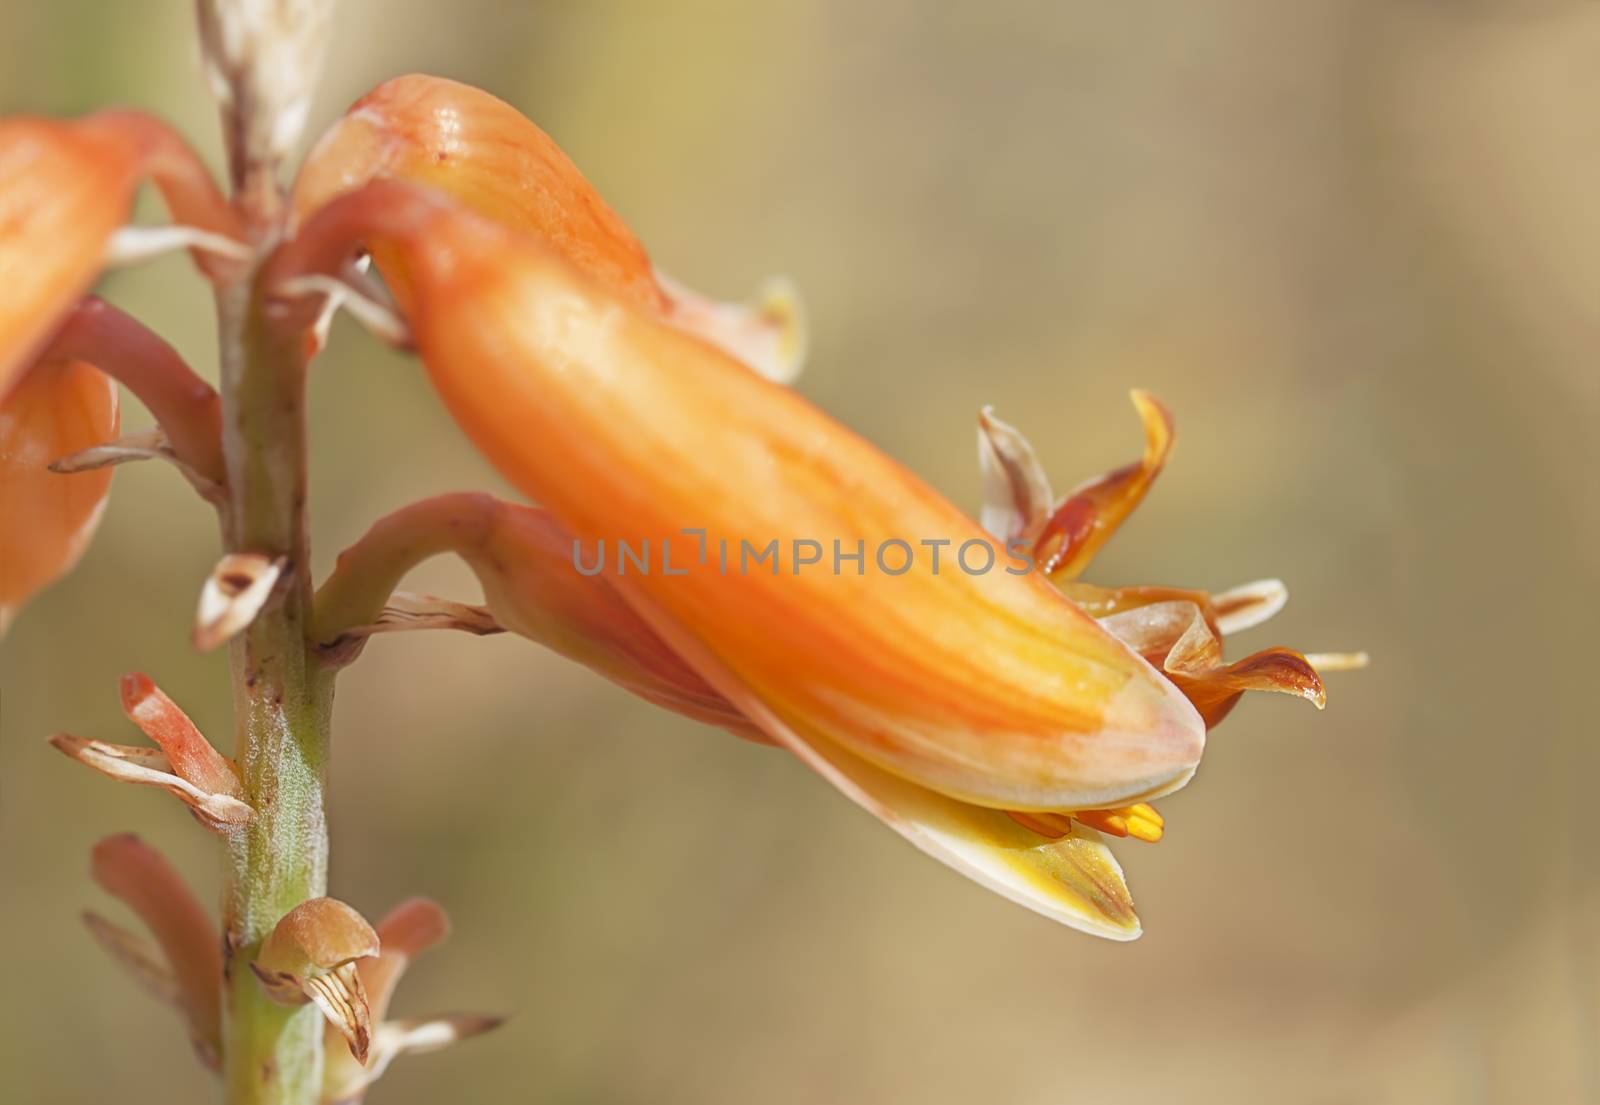 Macro of aloe vera flower close up with detail